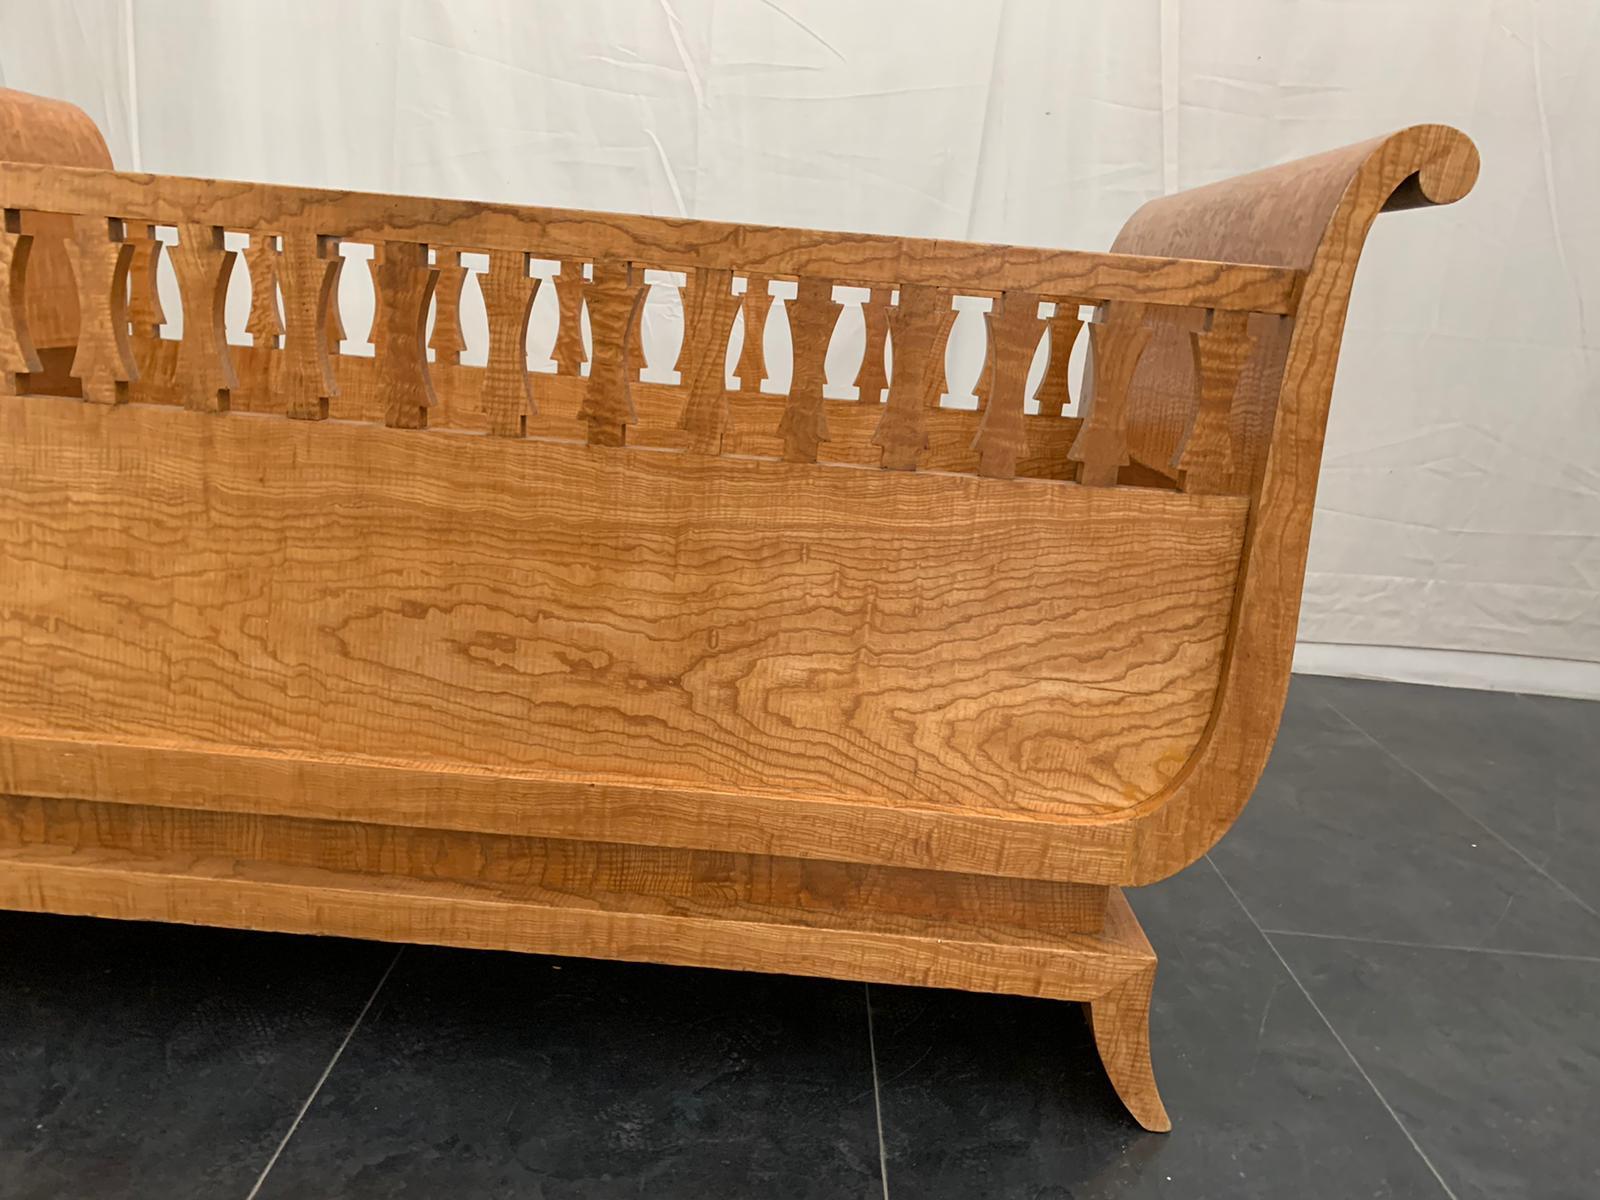 Splendid biedermeier cradle, re-proposed in the art deco period perfectly functional and very solid, the banks are fixed. Available the top base in new plywood with holes for mattress support cm 60x125. in solid wood veneered with elm rootwood. The